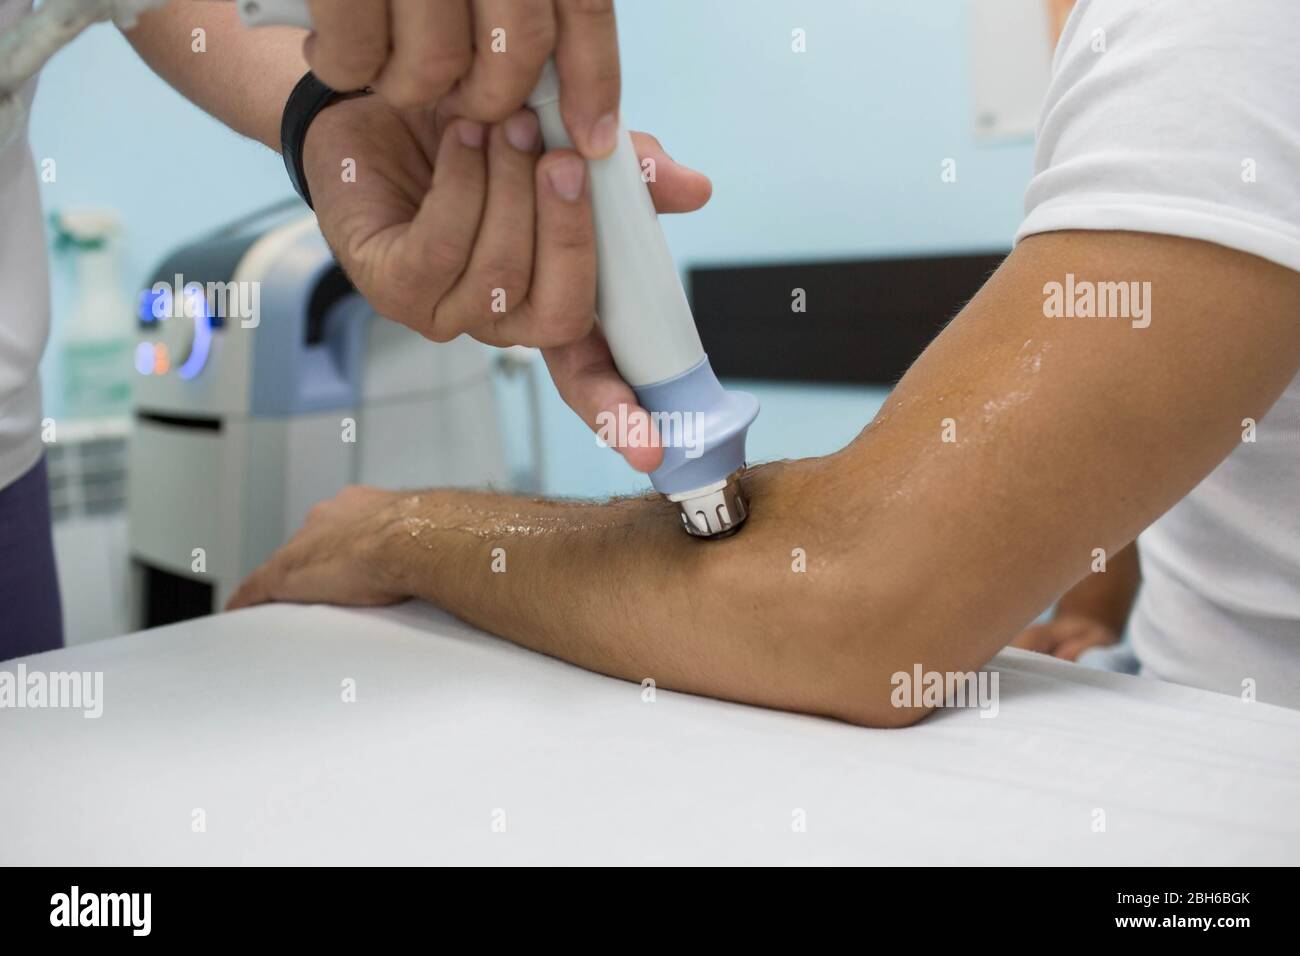 https://c8.alamy.com/comp/2BH6BGK/procedure-shock-wave-therapy-at-clinic-physiotherapist-treatment-pain-on-the-arm-with-shock-wave-equipment-2BH6BGK.jpg